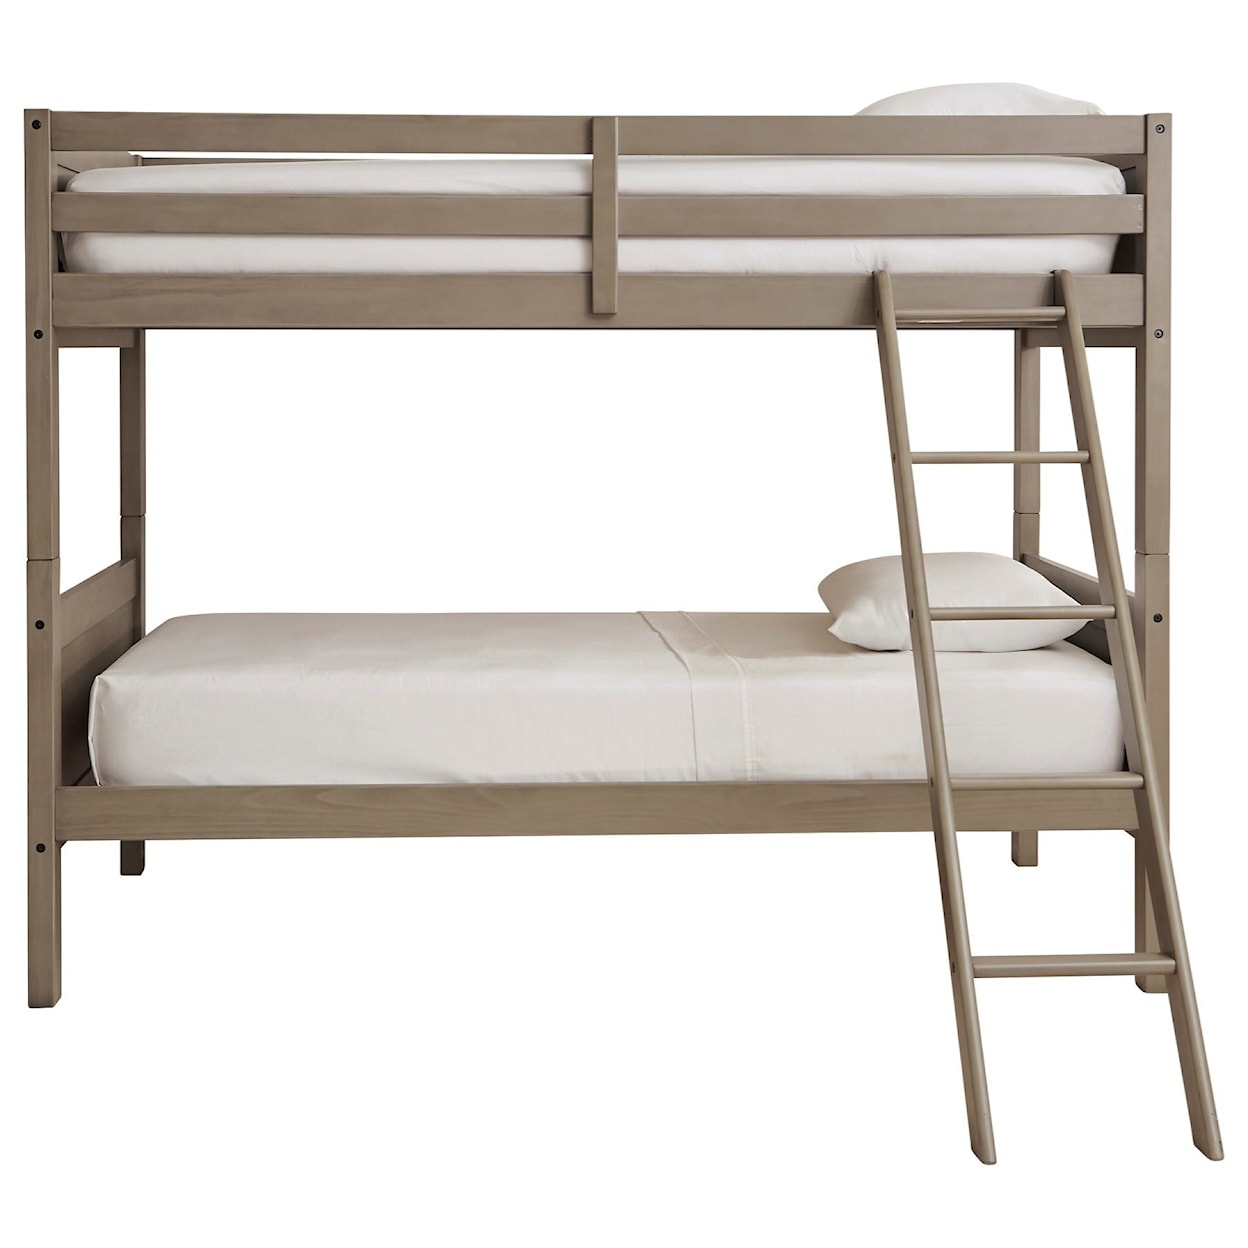 Signature Design by Ashley Furniture Lettner Twin/Twin Bunk Bed w/ Ladder